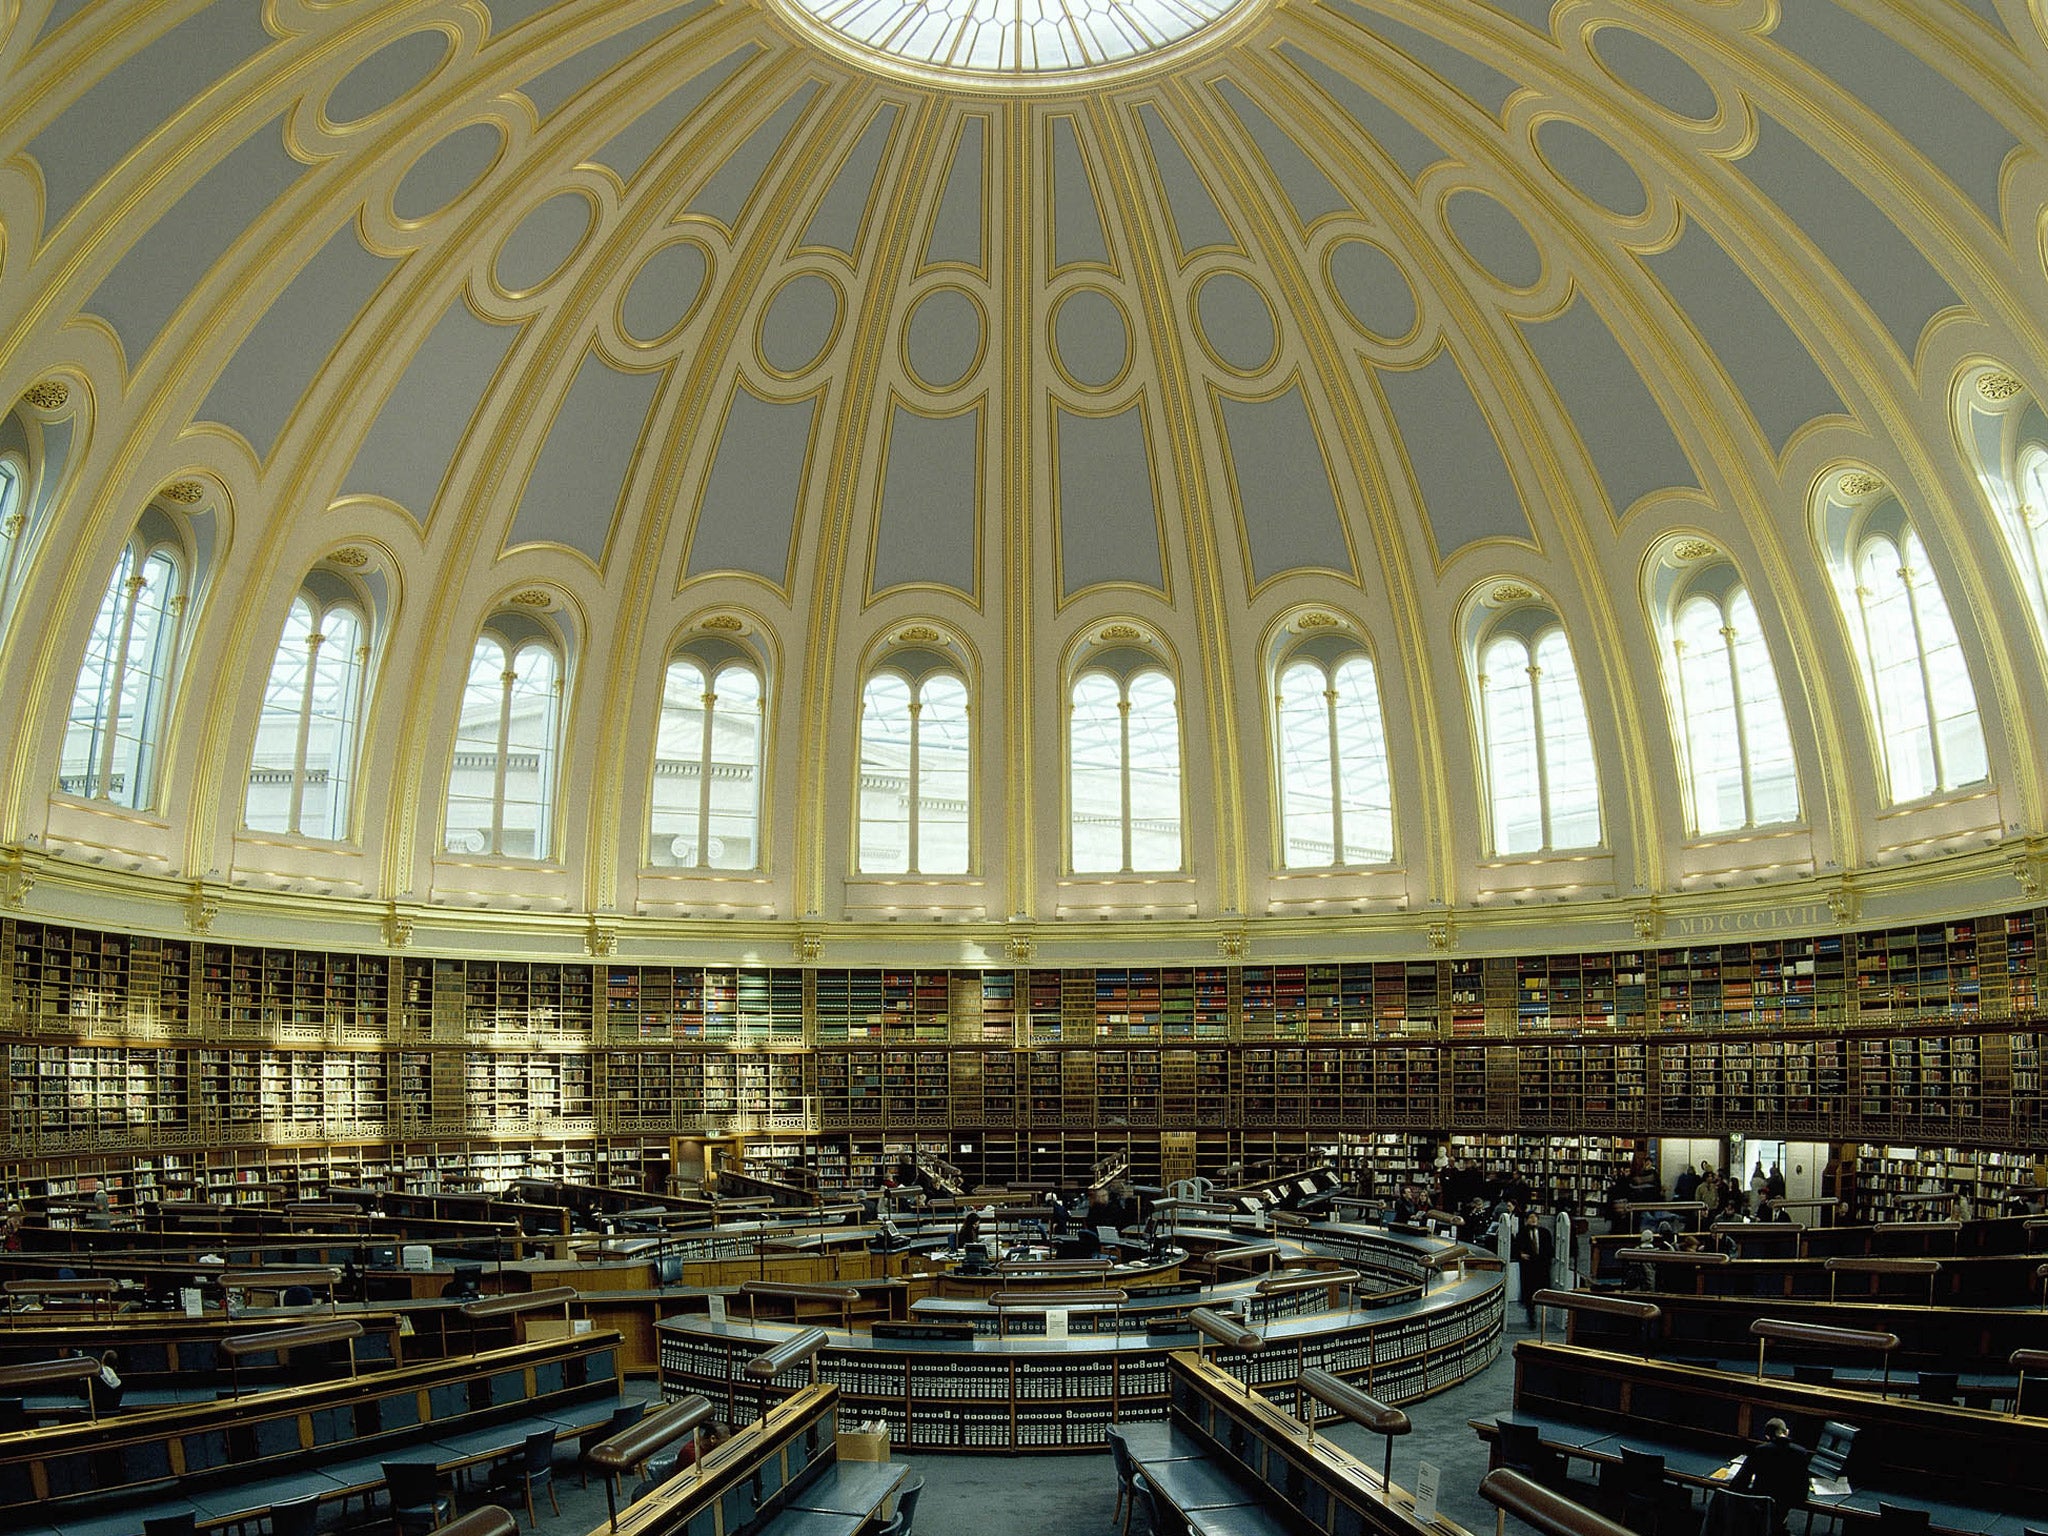 The Reading Room houses a collection of 25,000 books, catalogues and other printed material